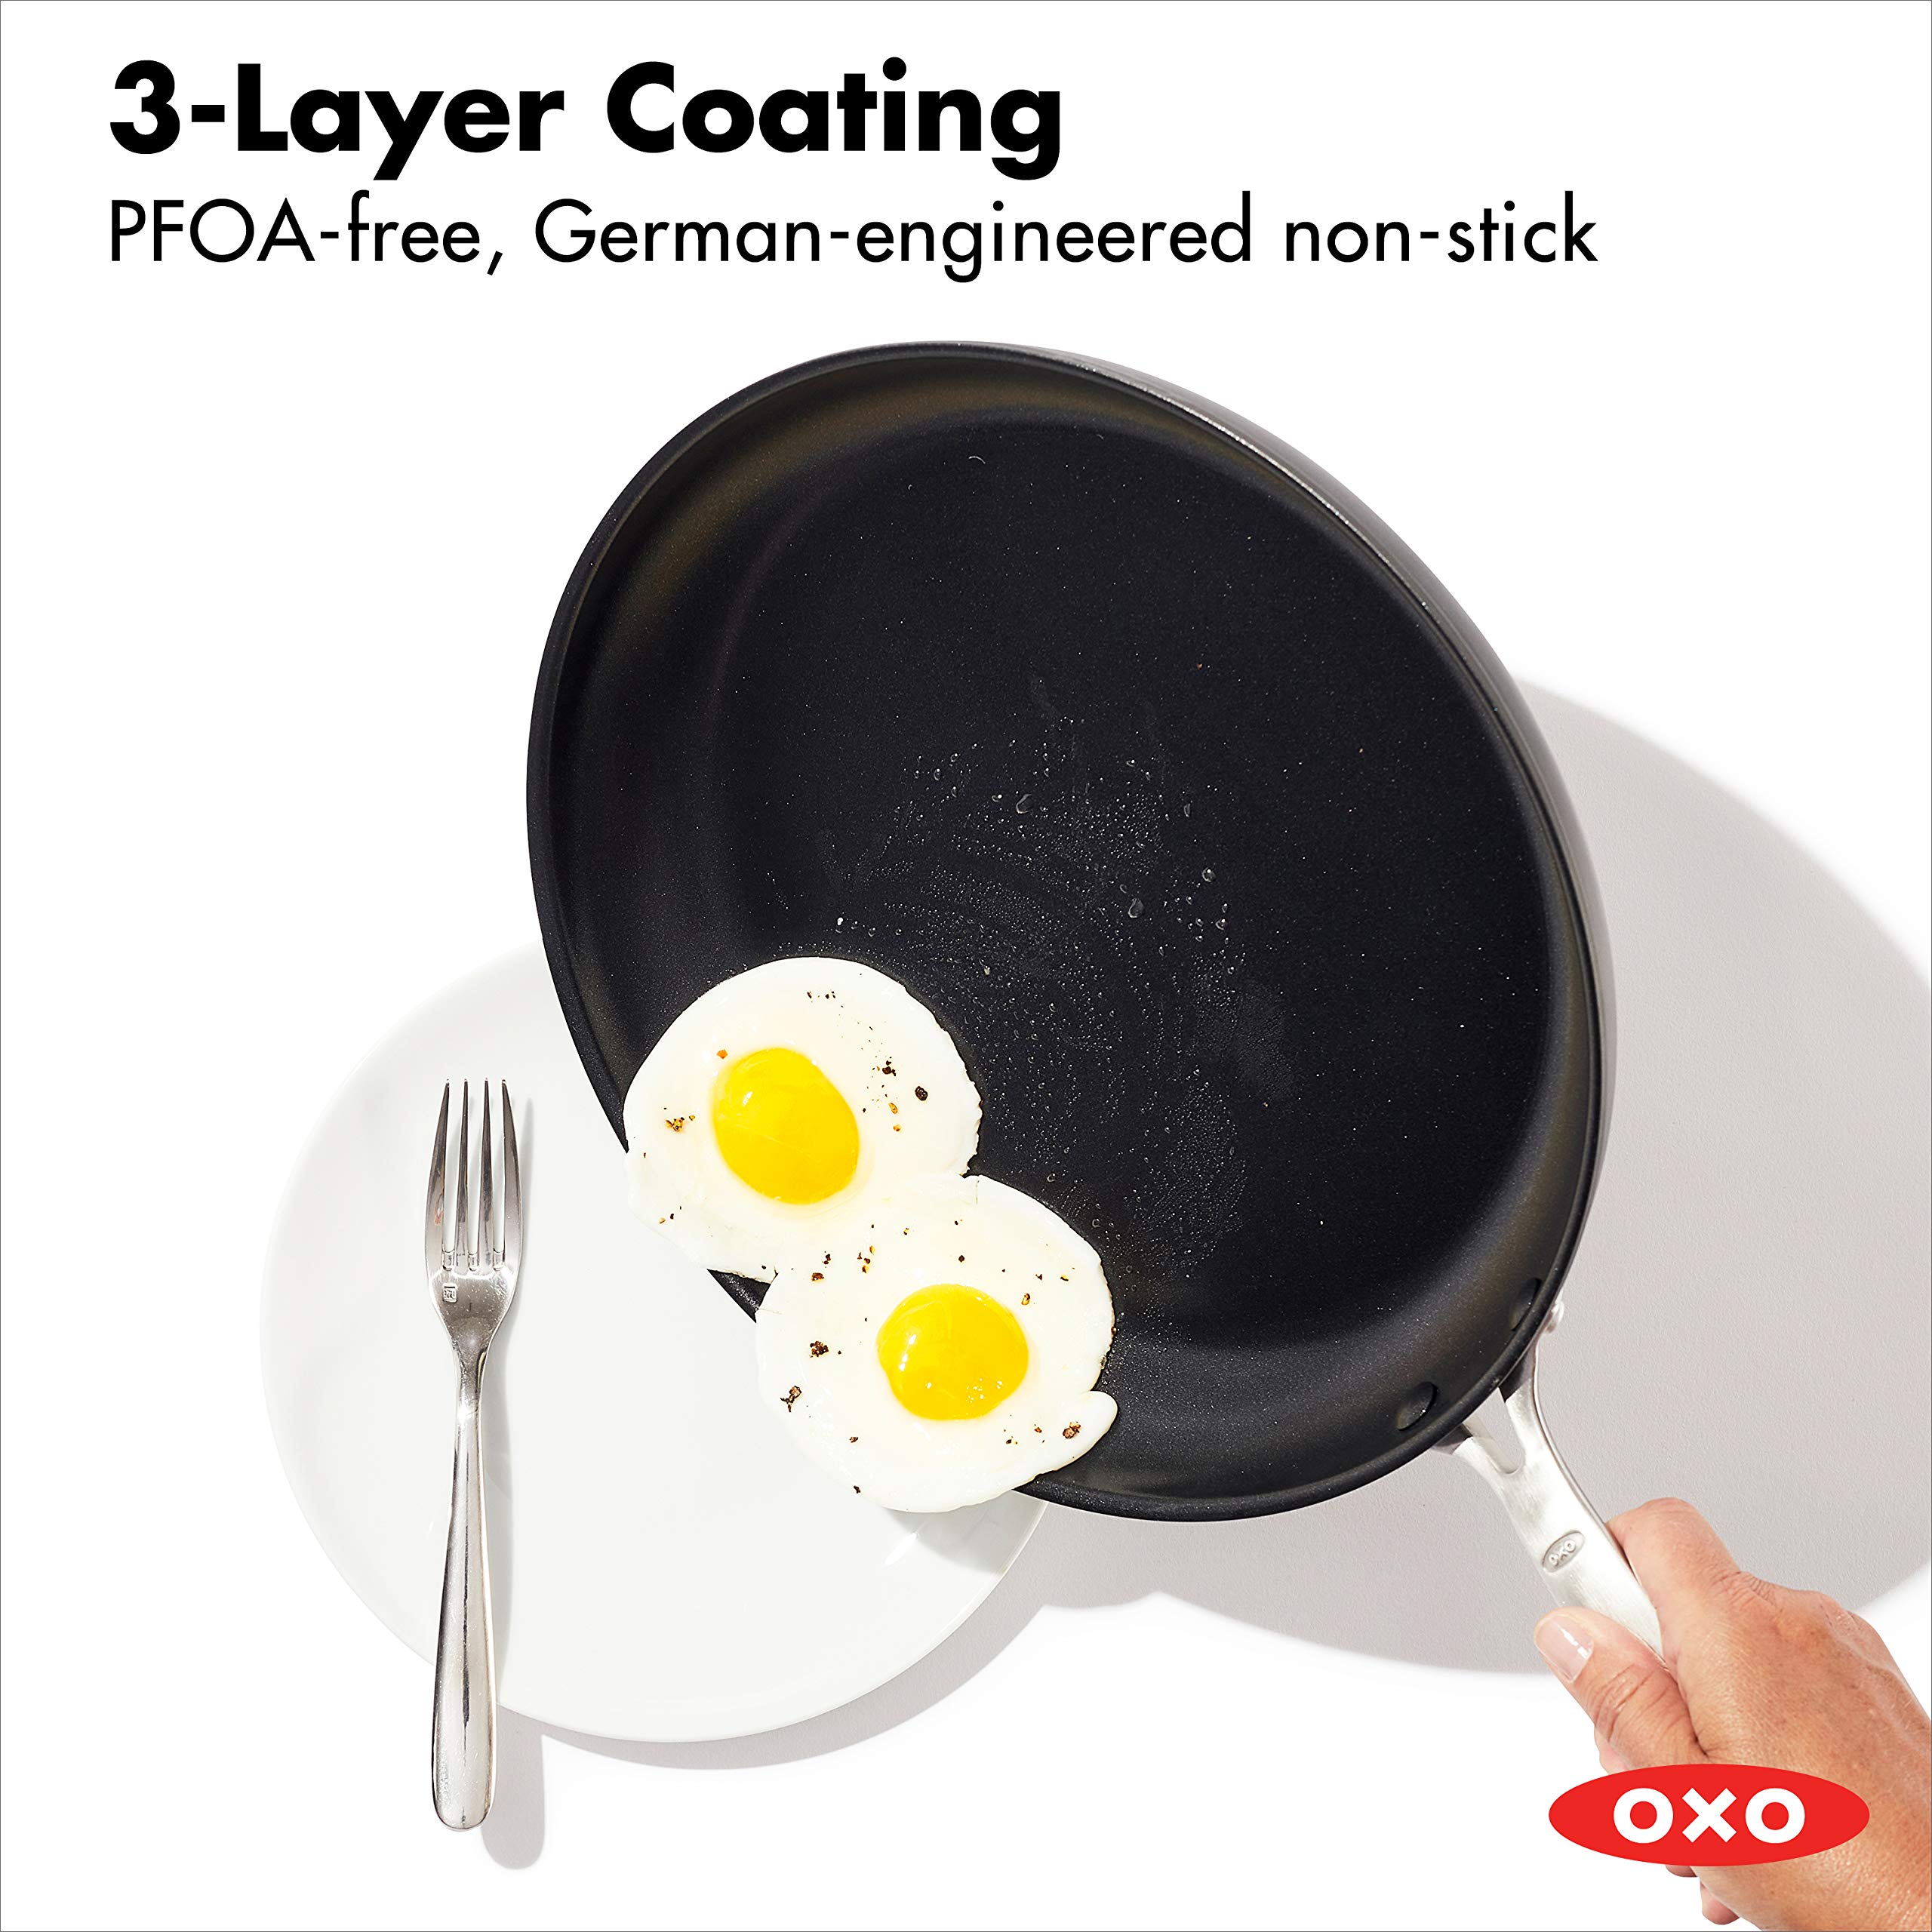 OXO Good Grips Non-Stick Pro Dishwasher safe 12" Open Frypan & Non-Stick Pro Dishwasher safe 8" Open Frypan,Gray,8-Inch